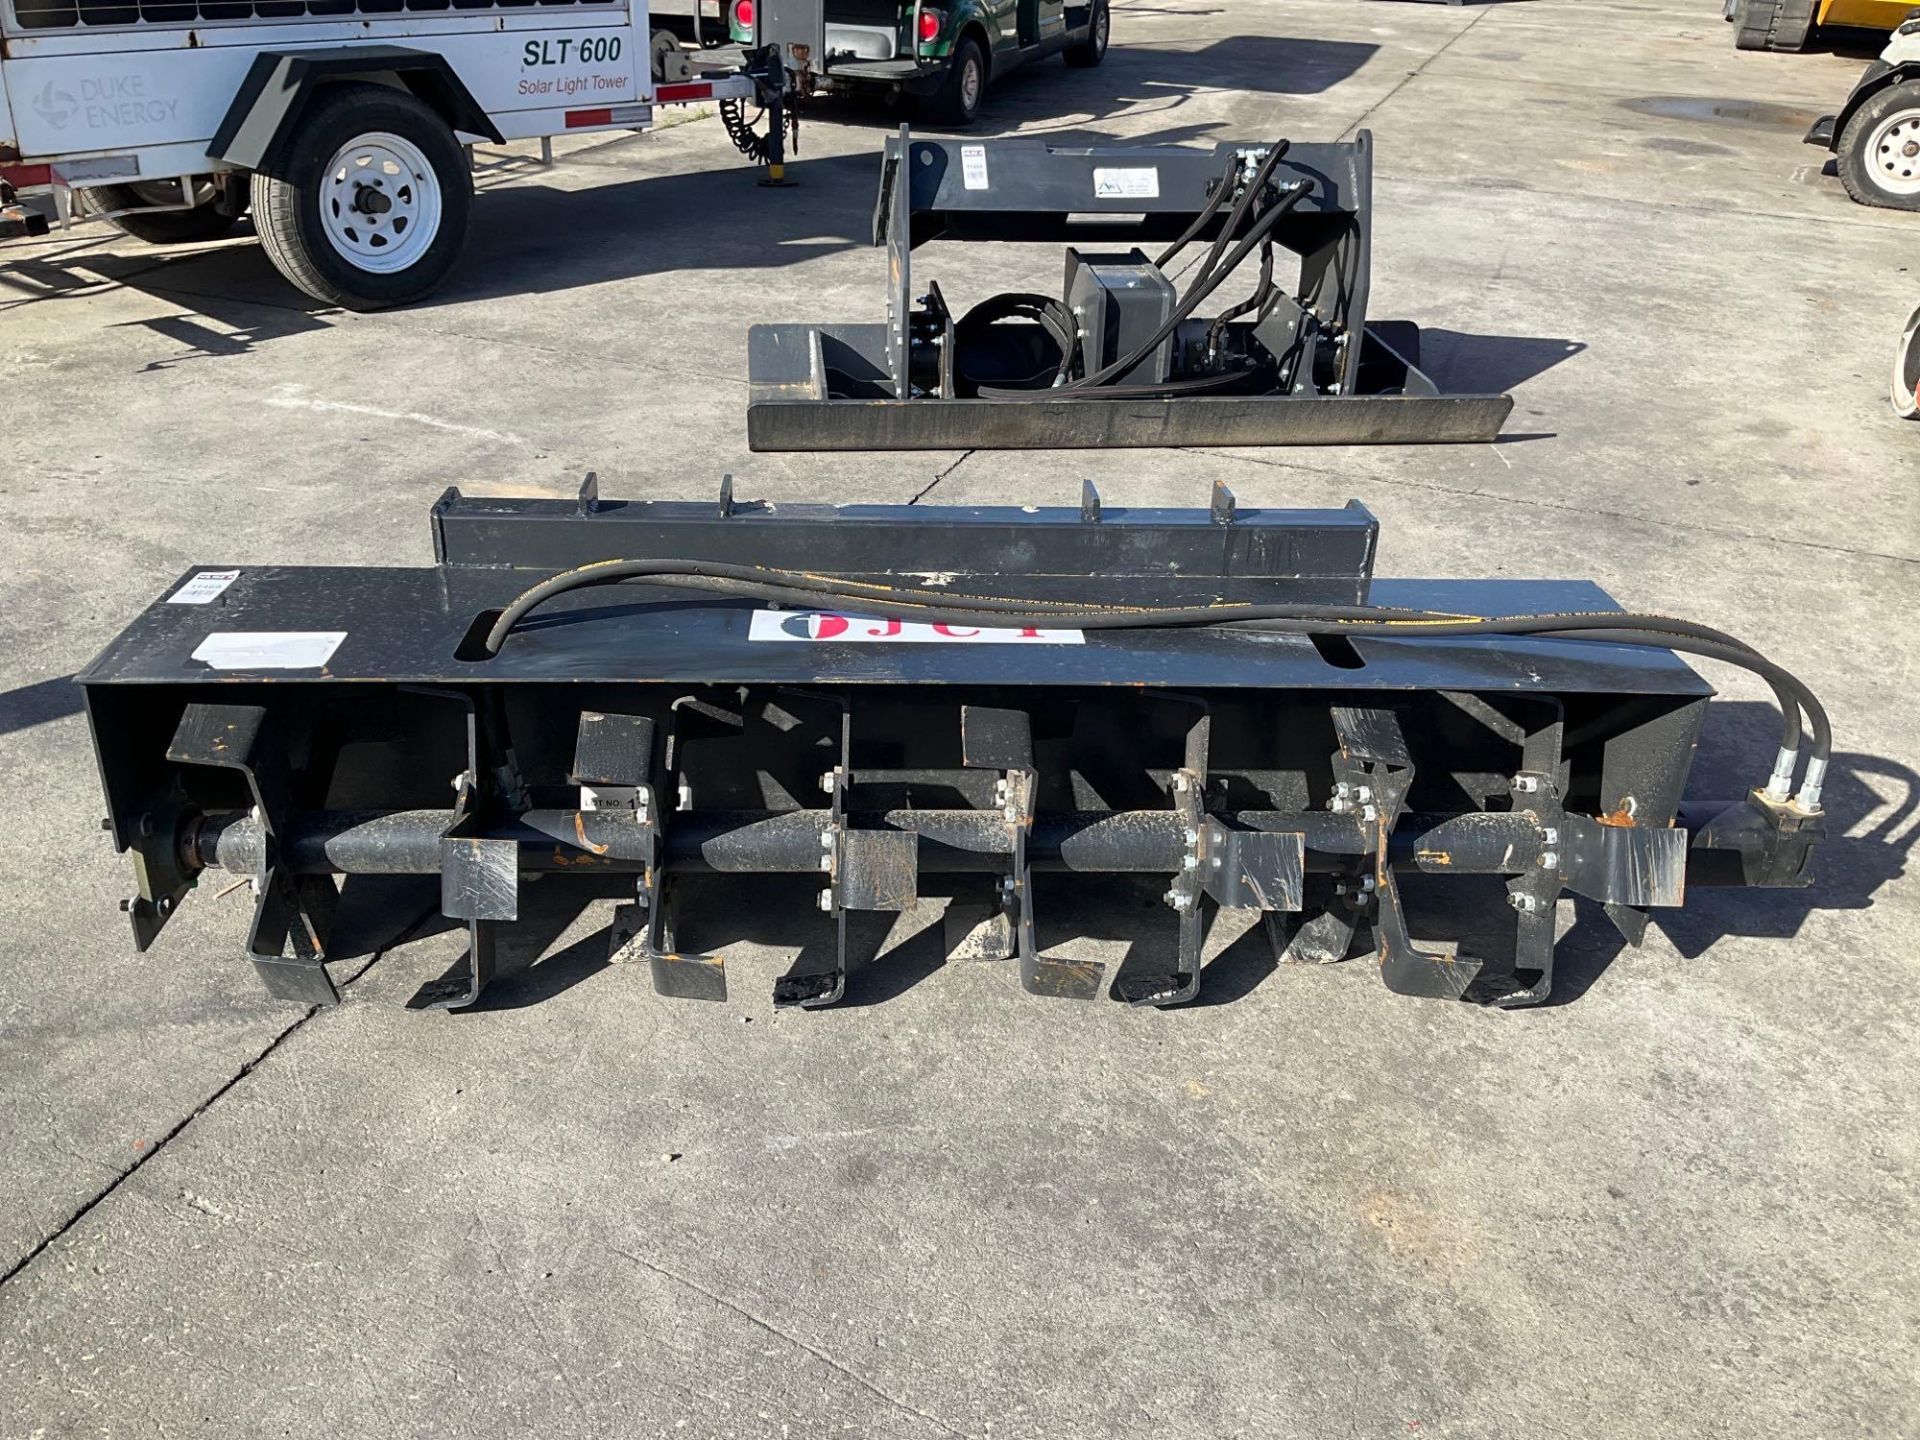 UNUSED TILLER ATTACHMENT FOR UNIVERSAL SKID STEER , APPROX 72” - Image 2 of 5